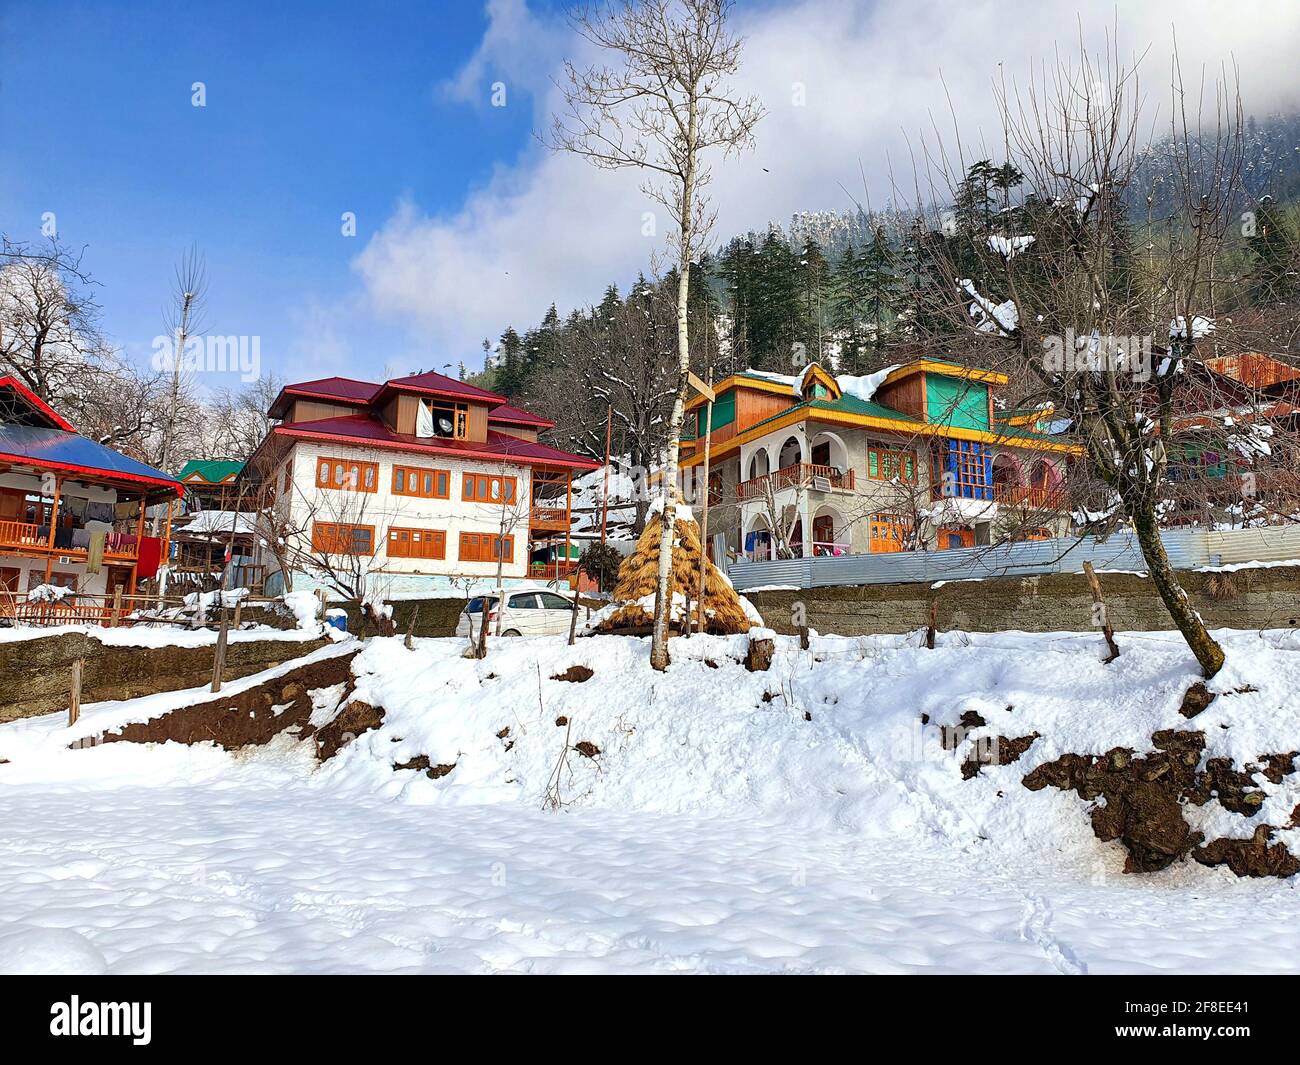 Snowcapped peaks, clear blue skies, barren mountains with meandering rivers, Kashmir is picturesque. Scenic Beauty. Stock Photo